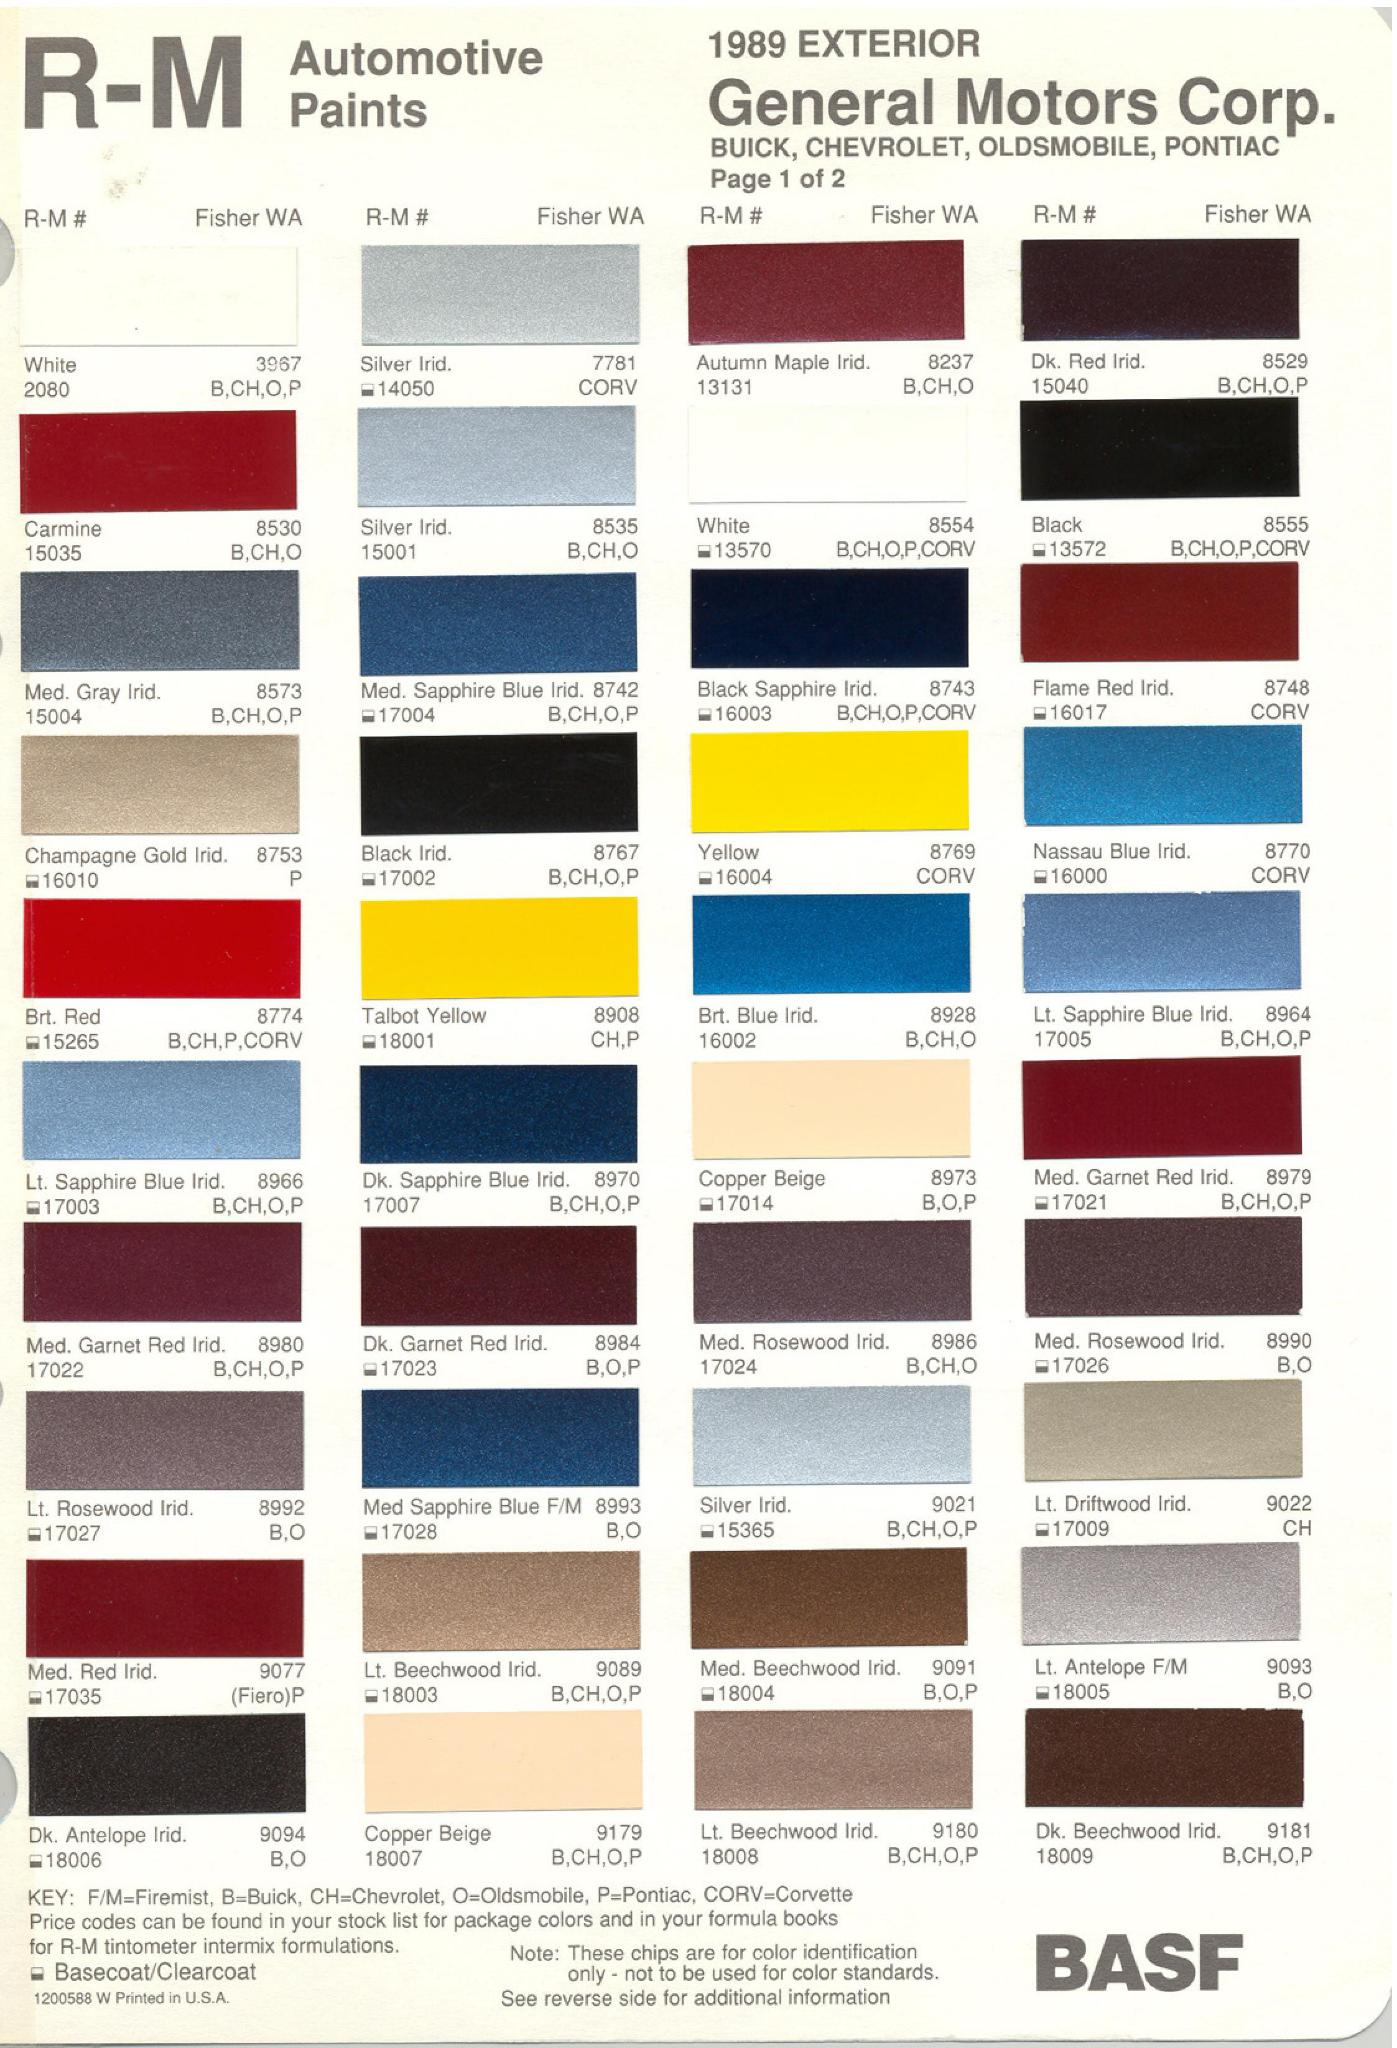 1985 GM DuPont Paint Chips Chevrolet Pontiac Buick Oldsmobile GMC Cadillac Truck